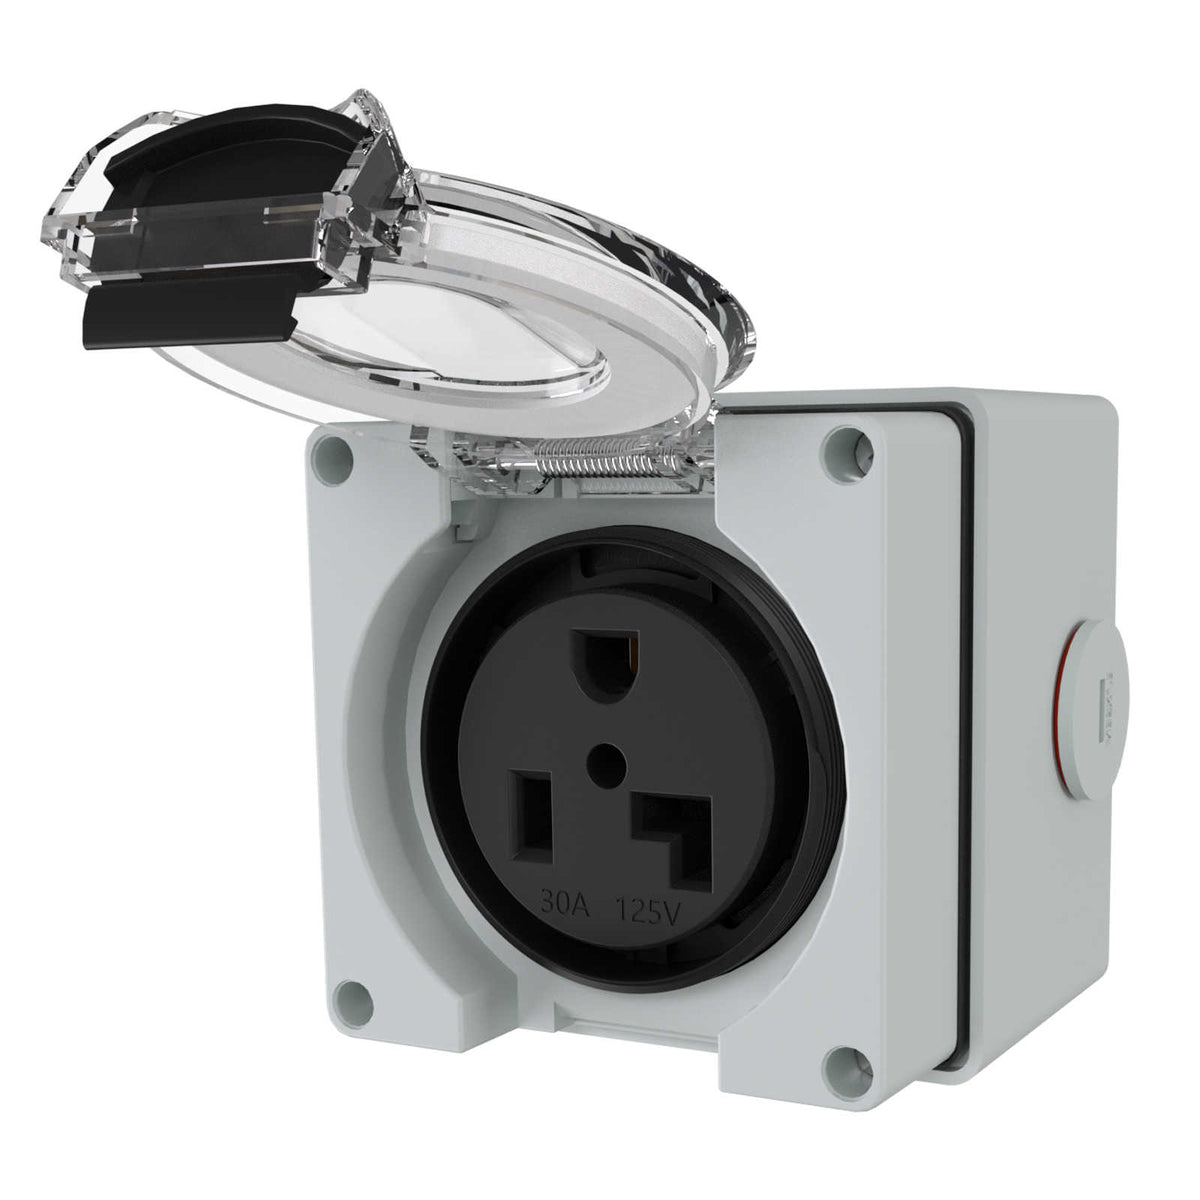 5-30R 30Amp Power Outlet Box